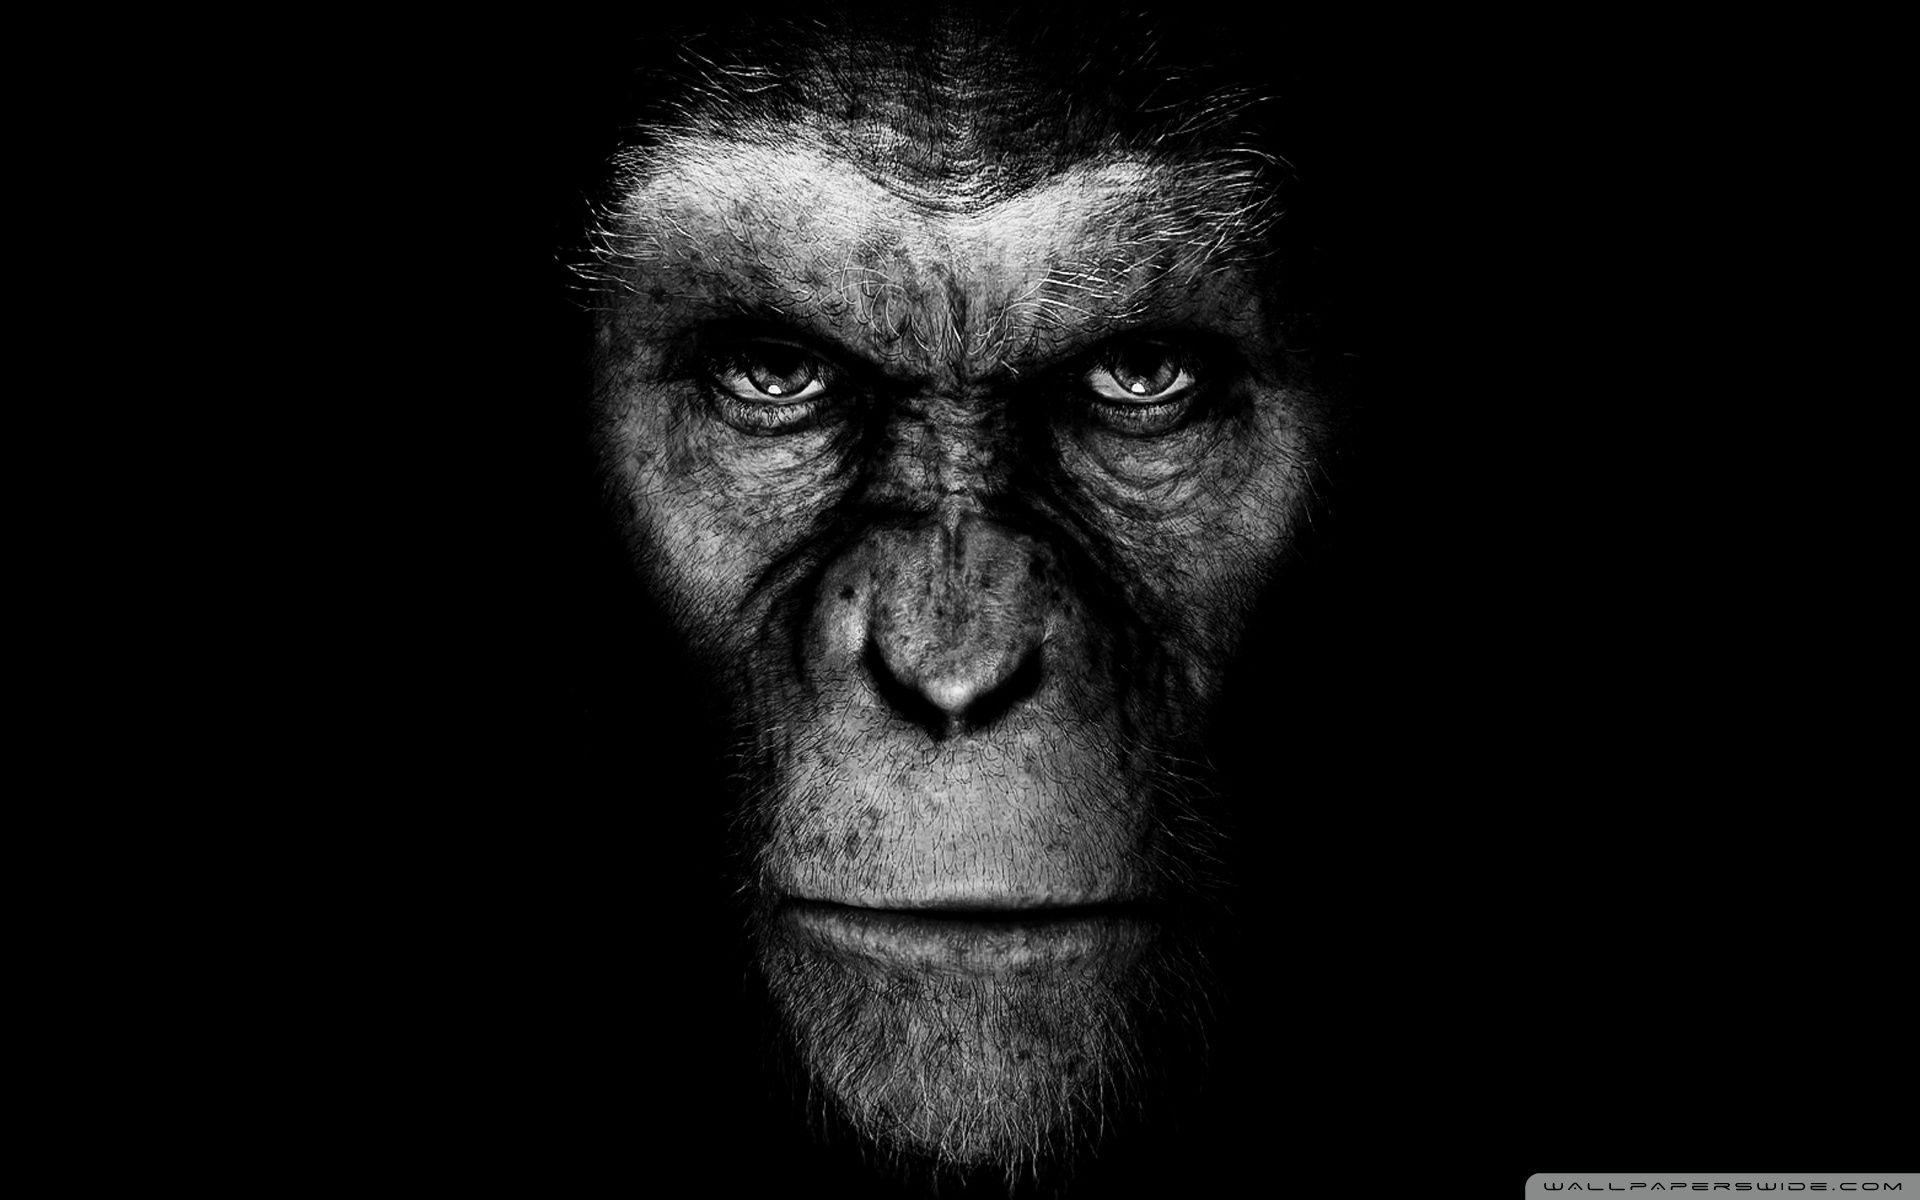 Planet of the Apes Wallpaper Free Planet of the Apes